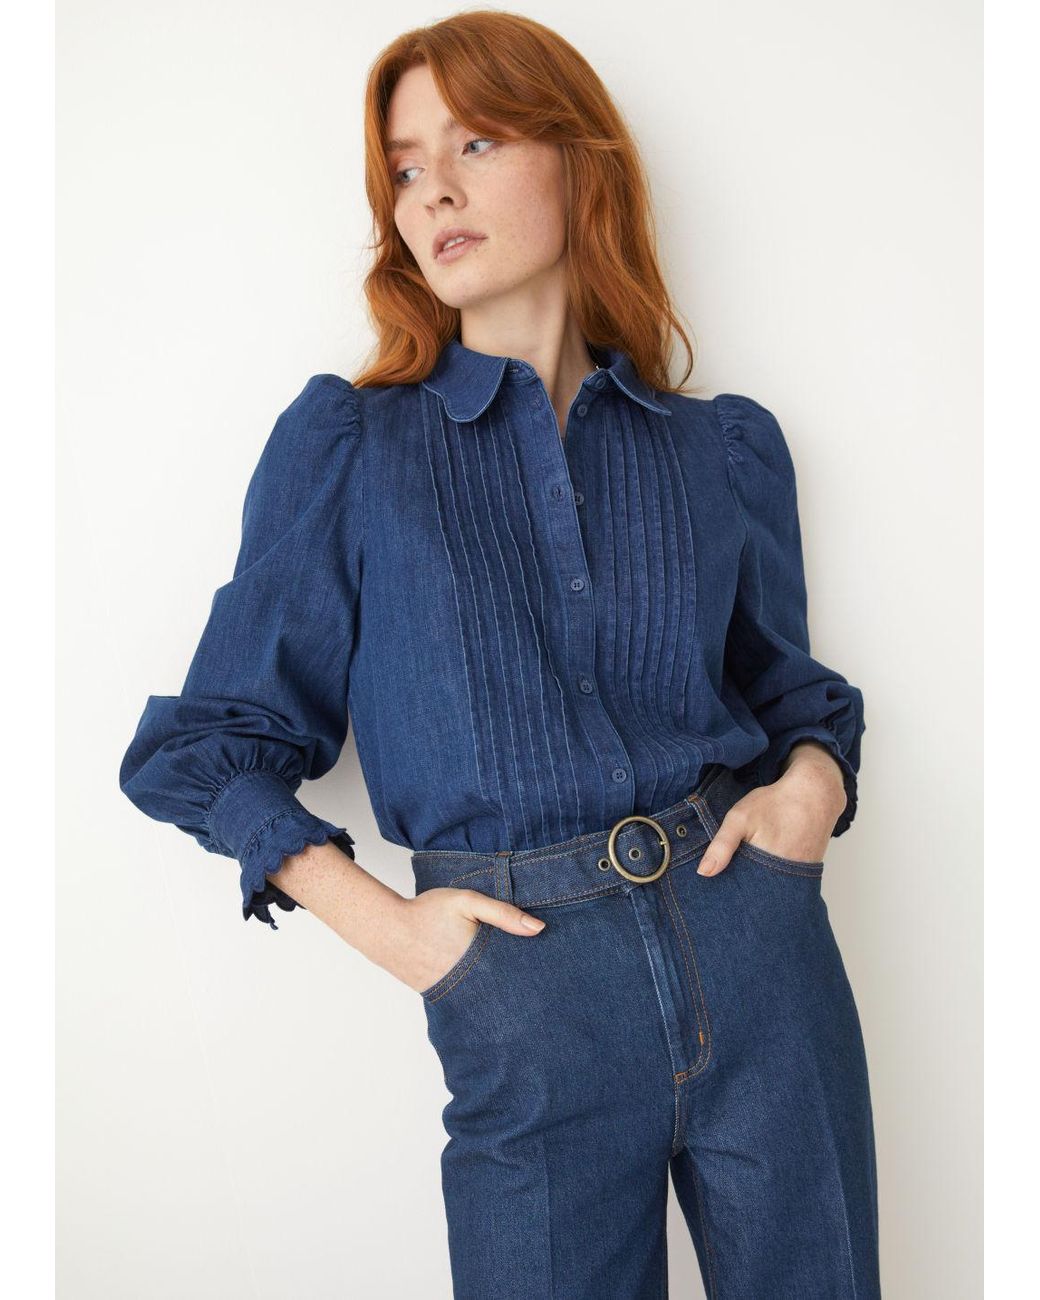 & Other Stories Puff Sleeve Denim Blouse in Blue | Lyst